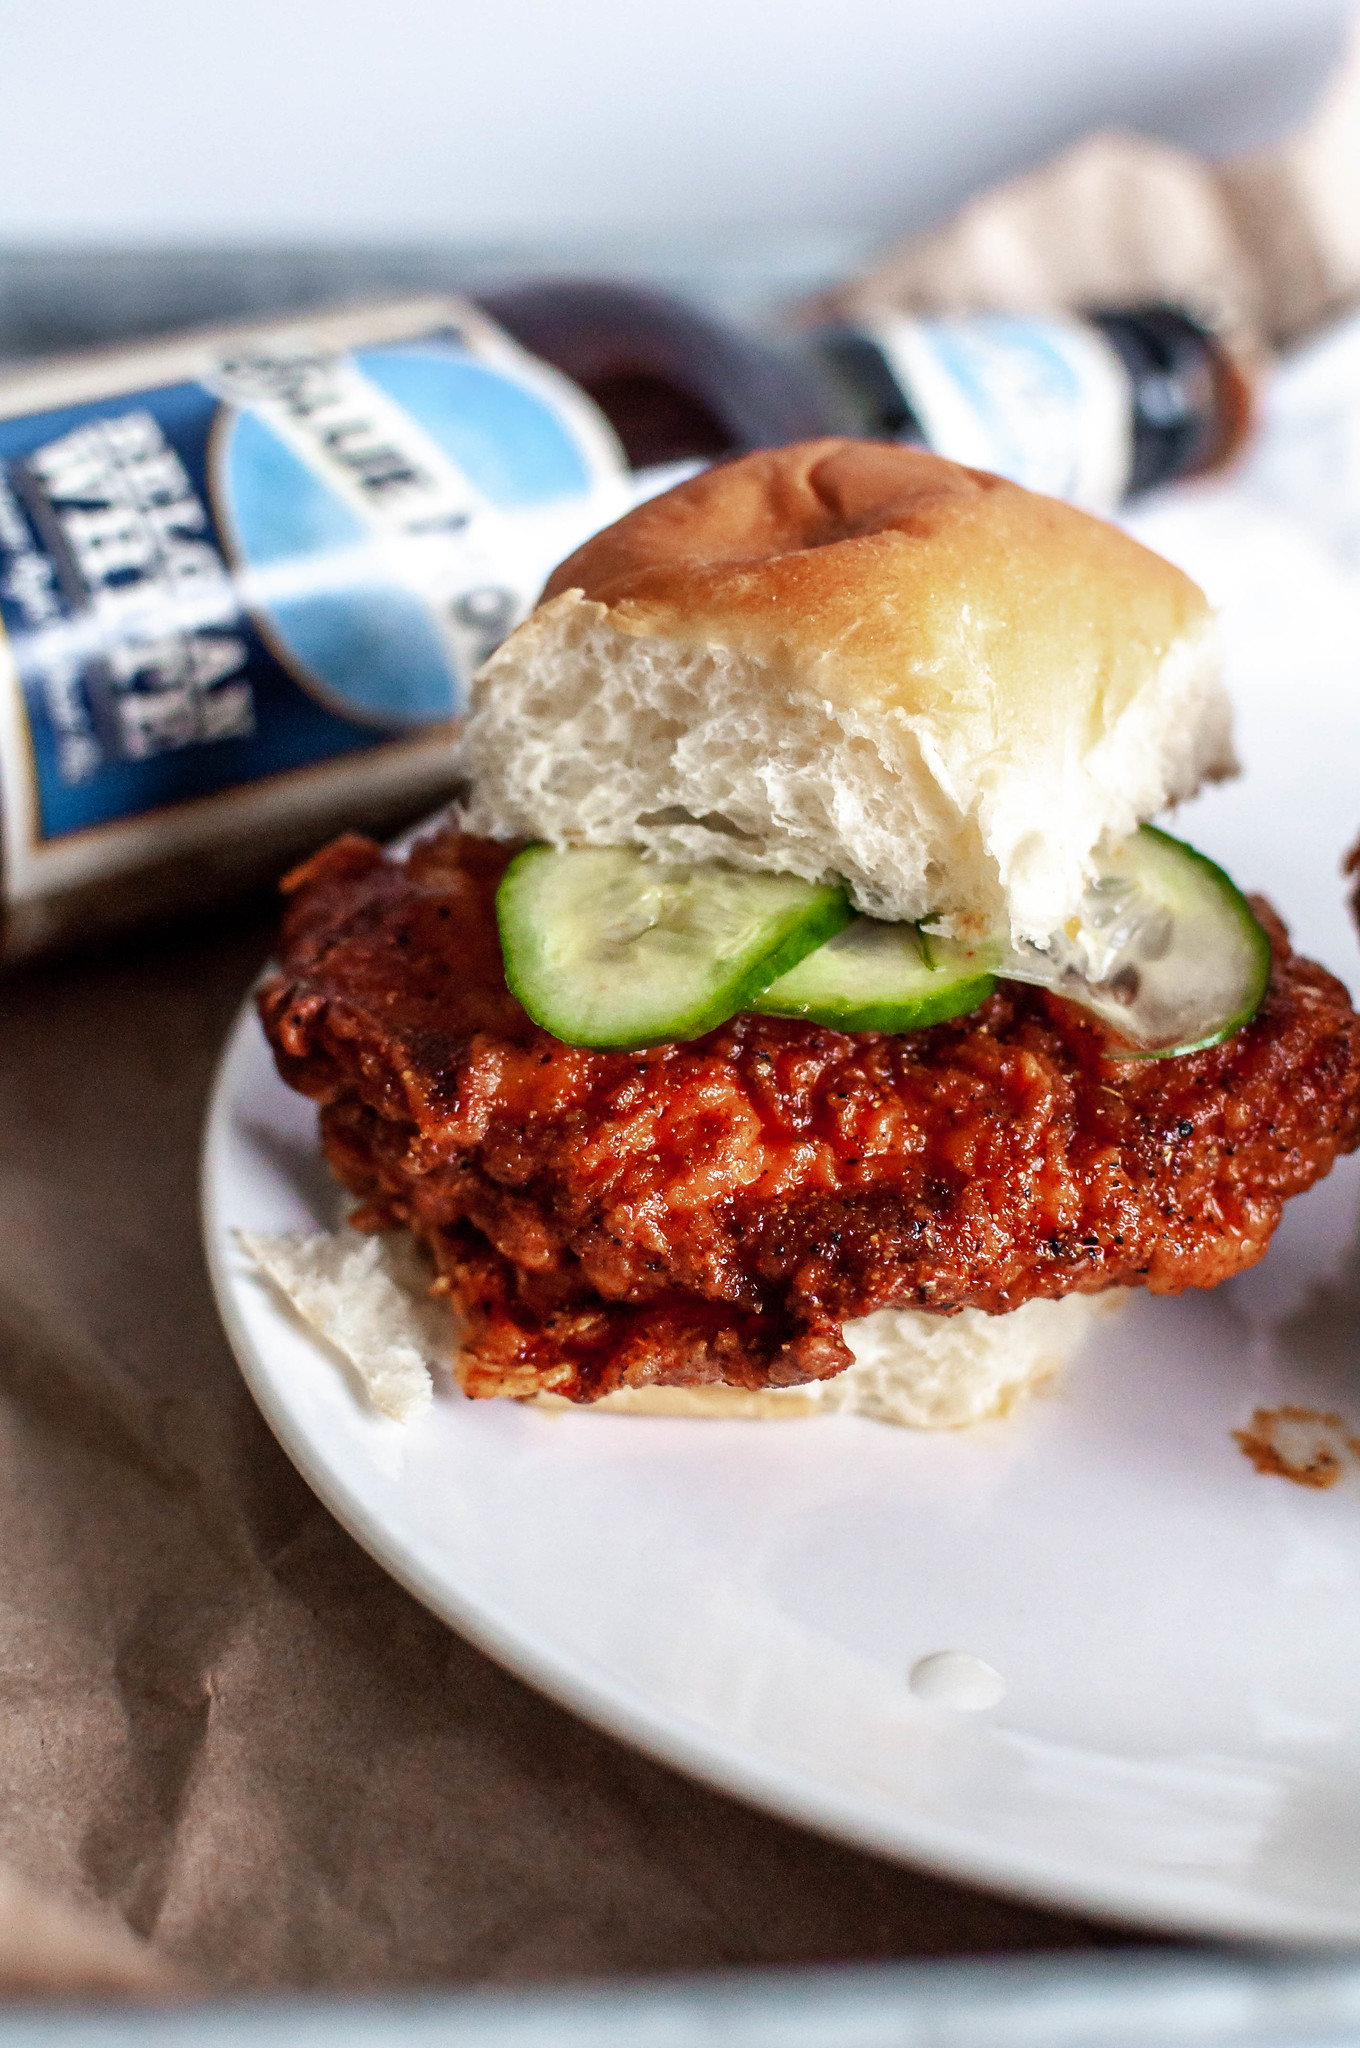 Hot Chicken Sliders with Quick Pickles are the ultimate game day food. Soft, buttery bread, crispy fried chicken, spicy sauce and fresh, crunchy pickles. 